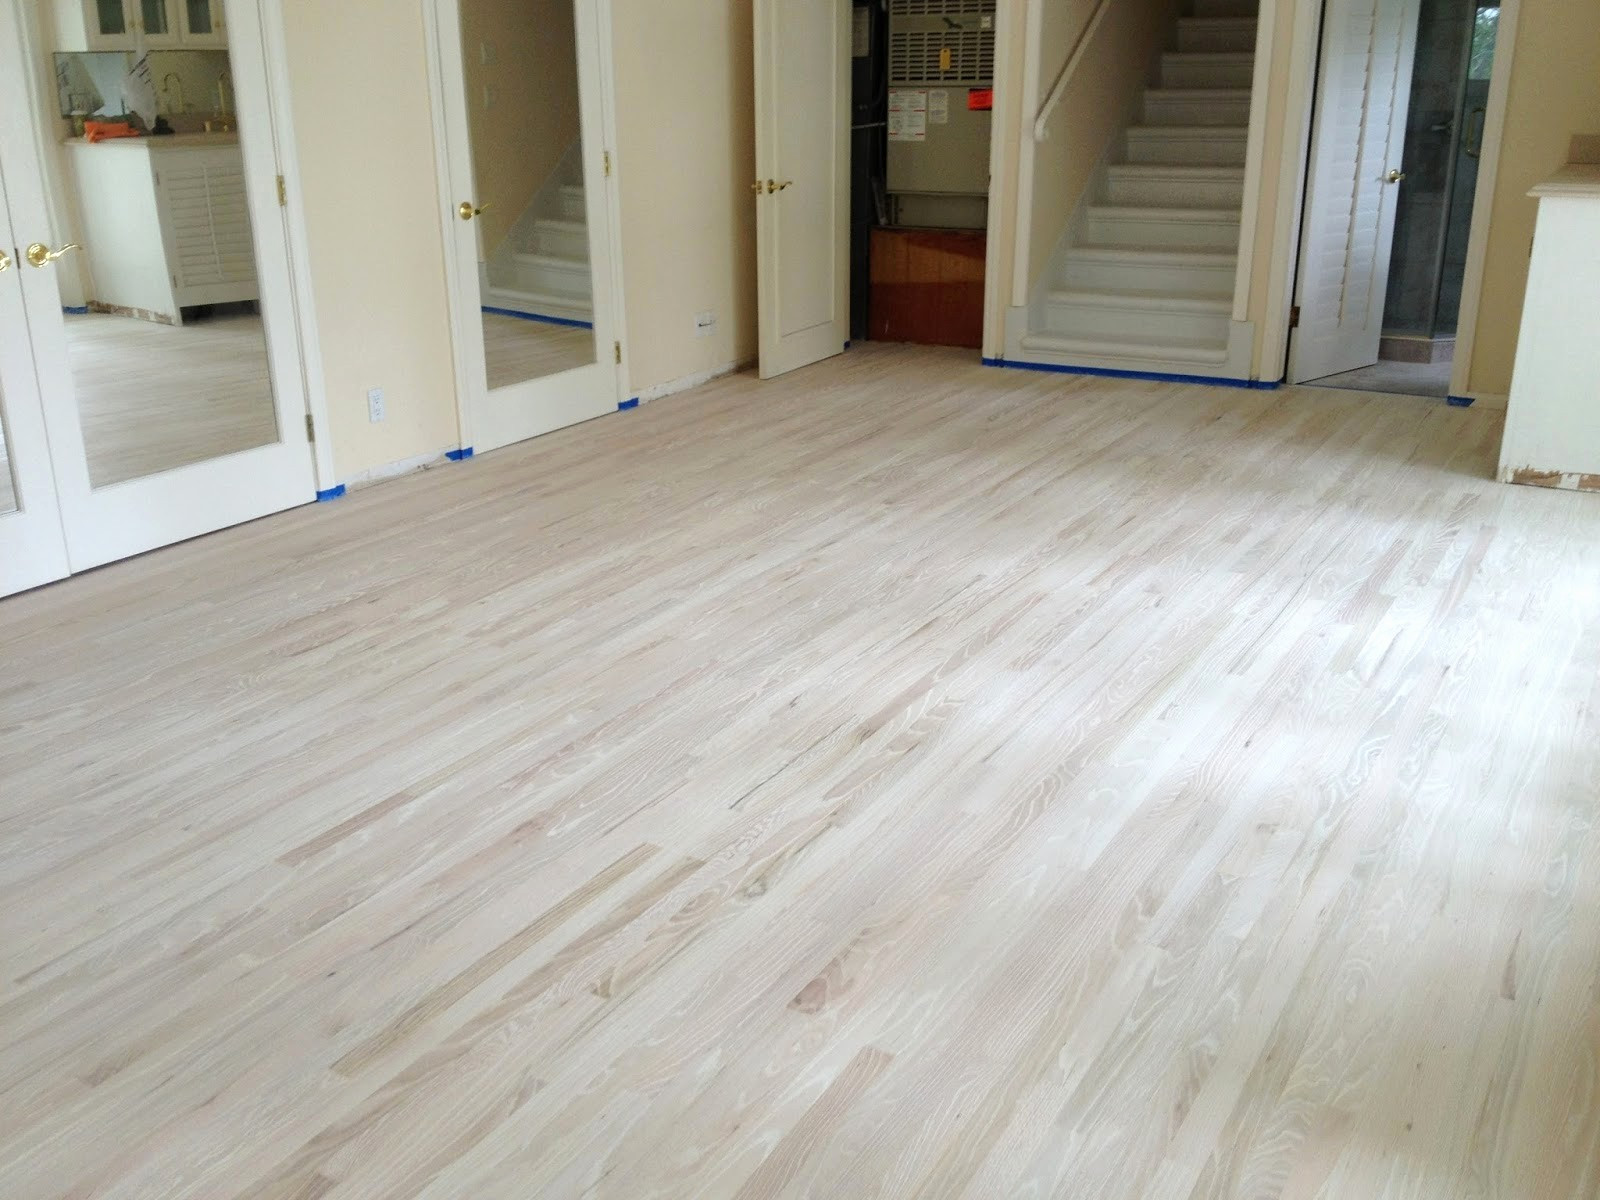 23 Elegant Cost to Pull Up Carpet and Refinish Hardwood Floors 2024 free download cost to pull up carpet and refinish hardwood floors of 19 unique how much does it cost to refinish hardwood floors gallery for how much does it cost to refinish hardwood floors best of wp co